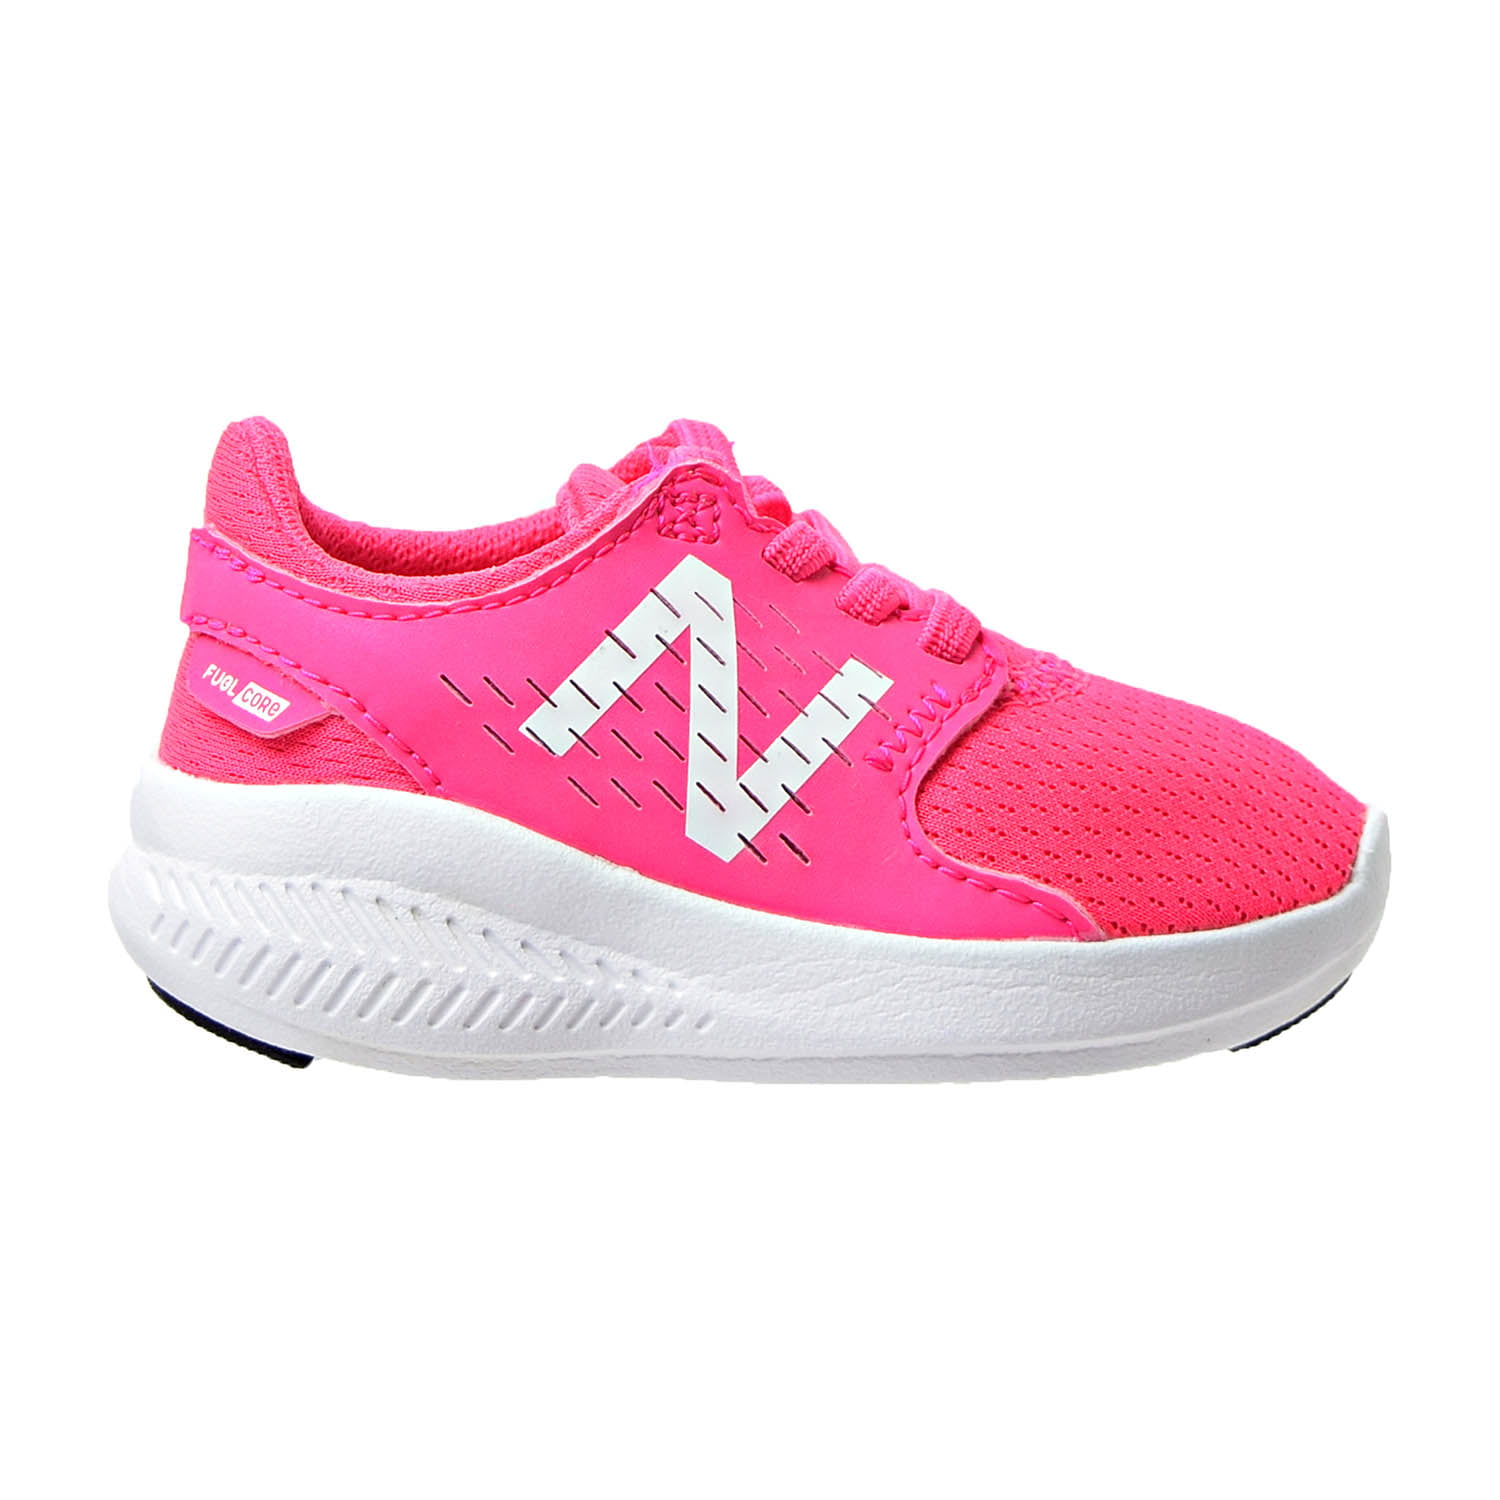 new balance fuelcore pink